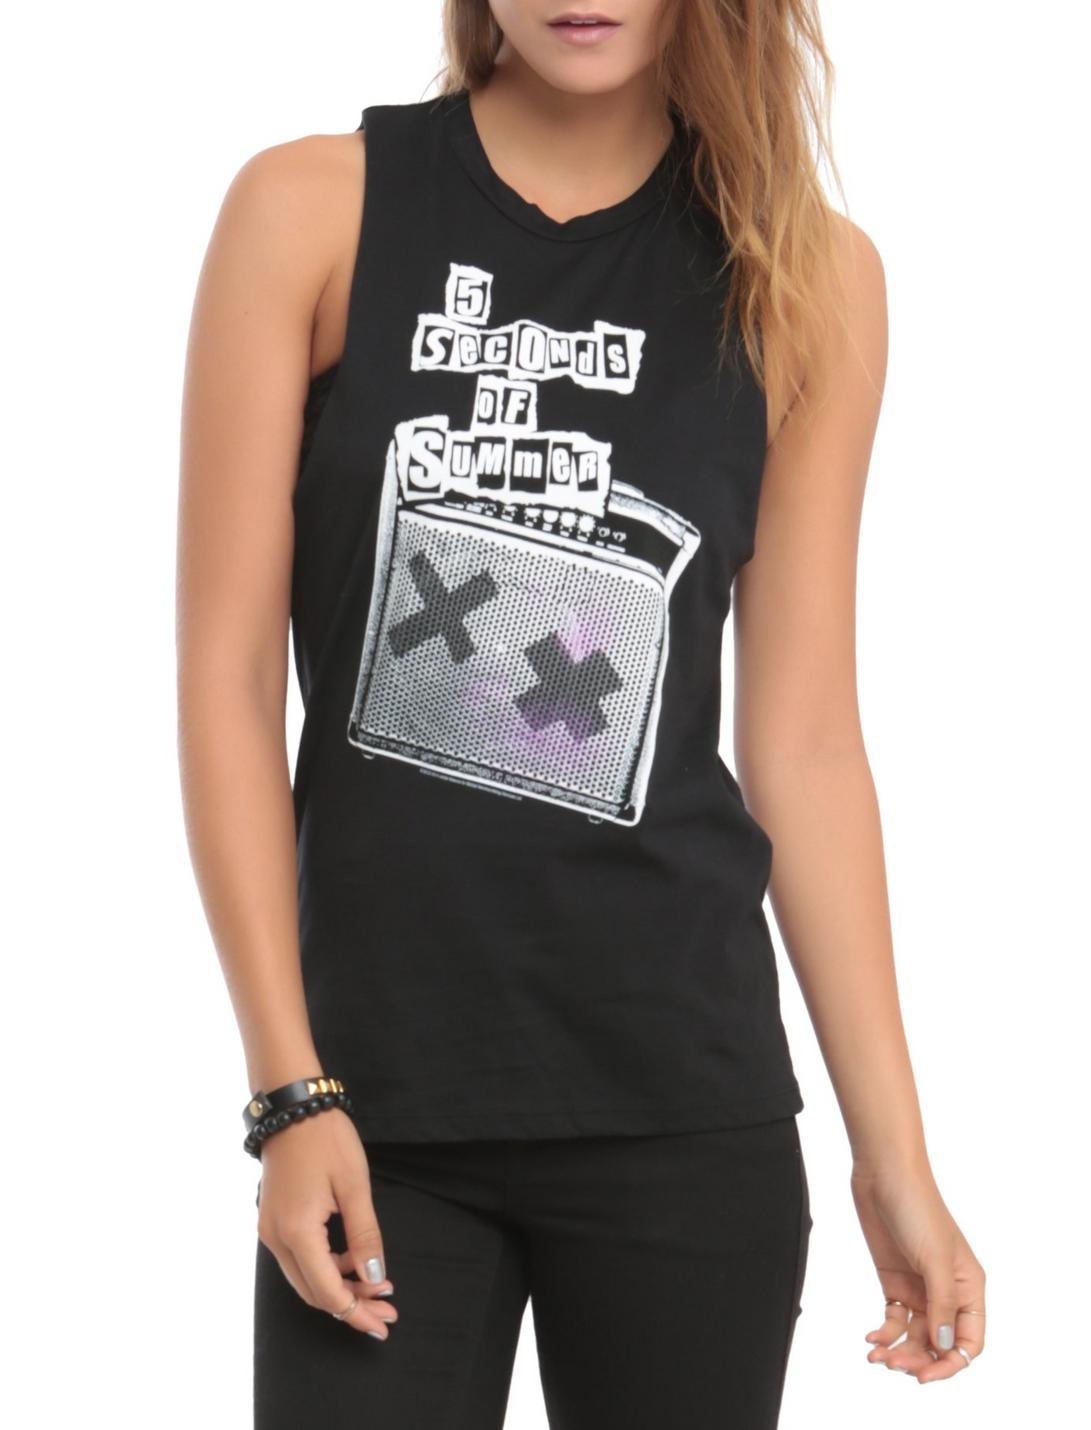 5 Seconds Of Summer Amp Girls Muscle Top, BLACK, hi-res